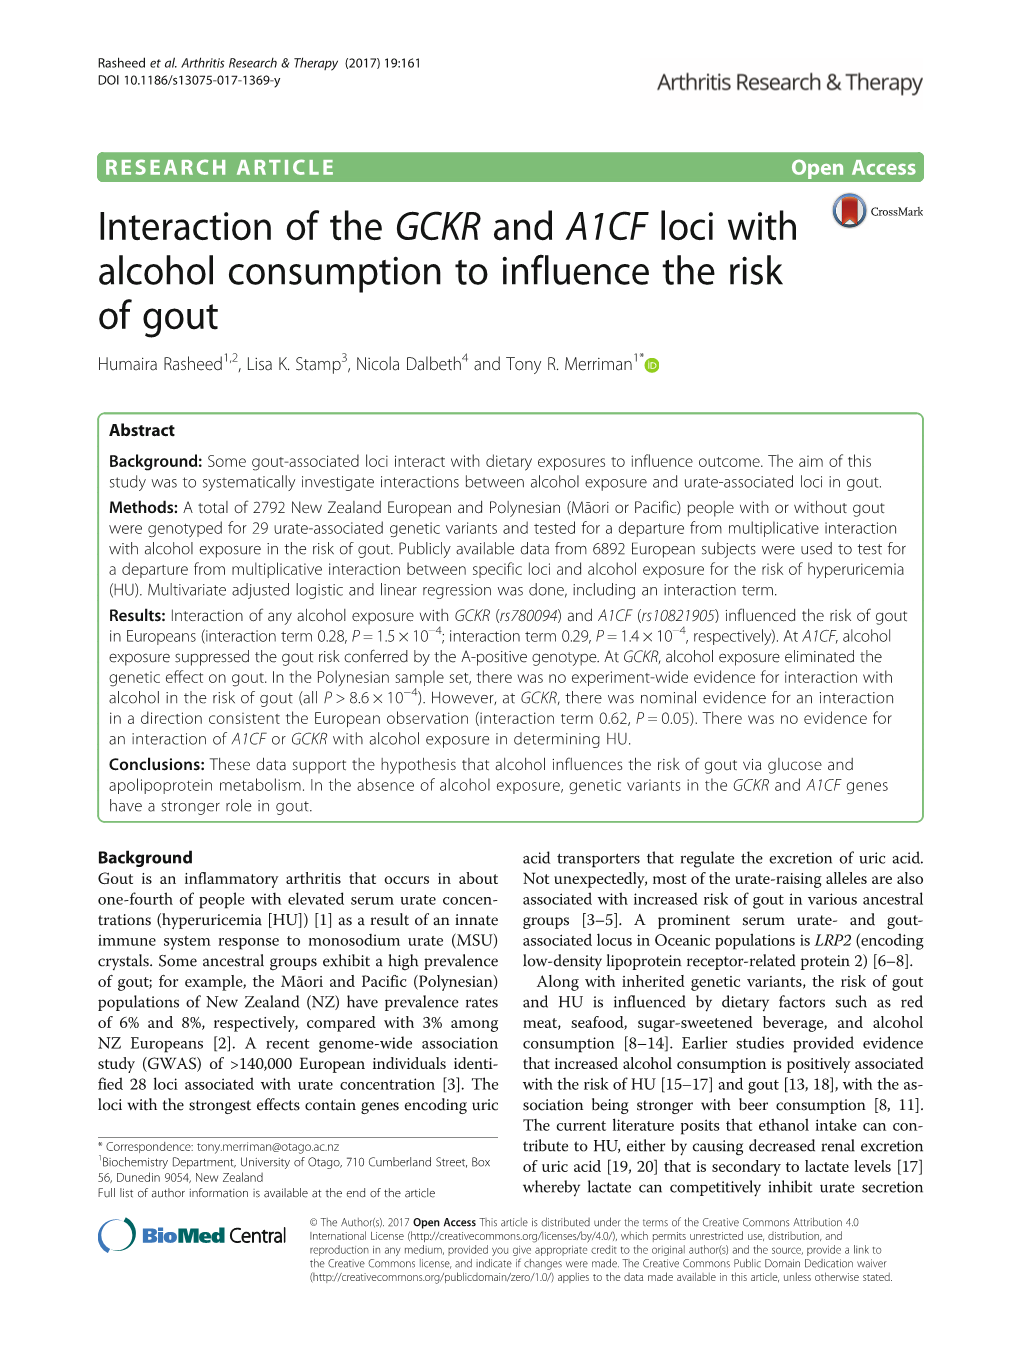 Interaction of the GCKR and A1CF Loci with Alcohol Consumption to Influence the Risk of Gout Humaira Rasheed1,2, Lisa K